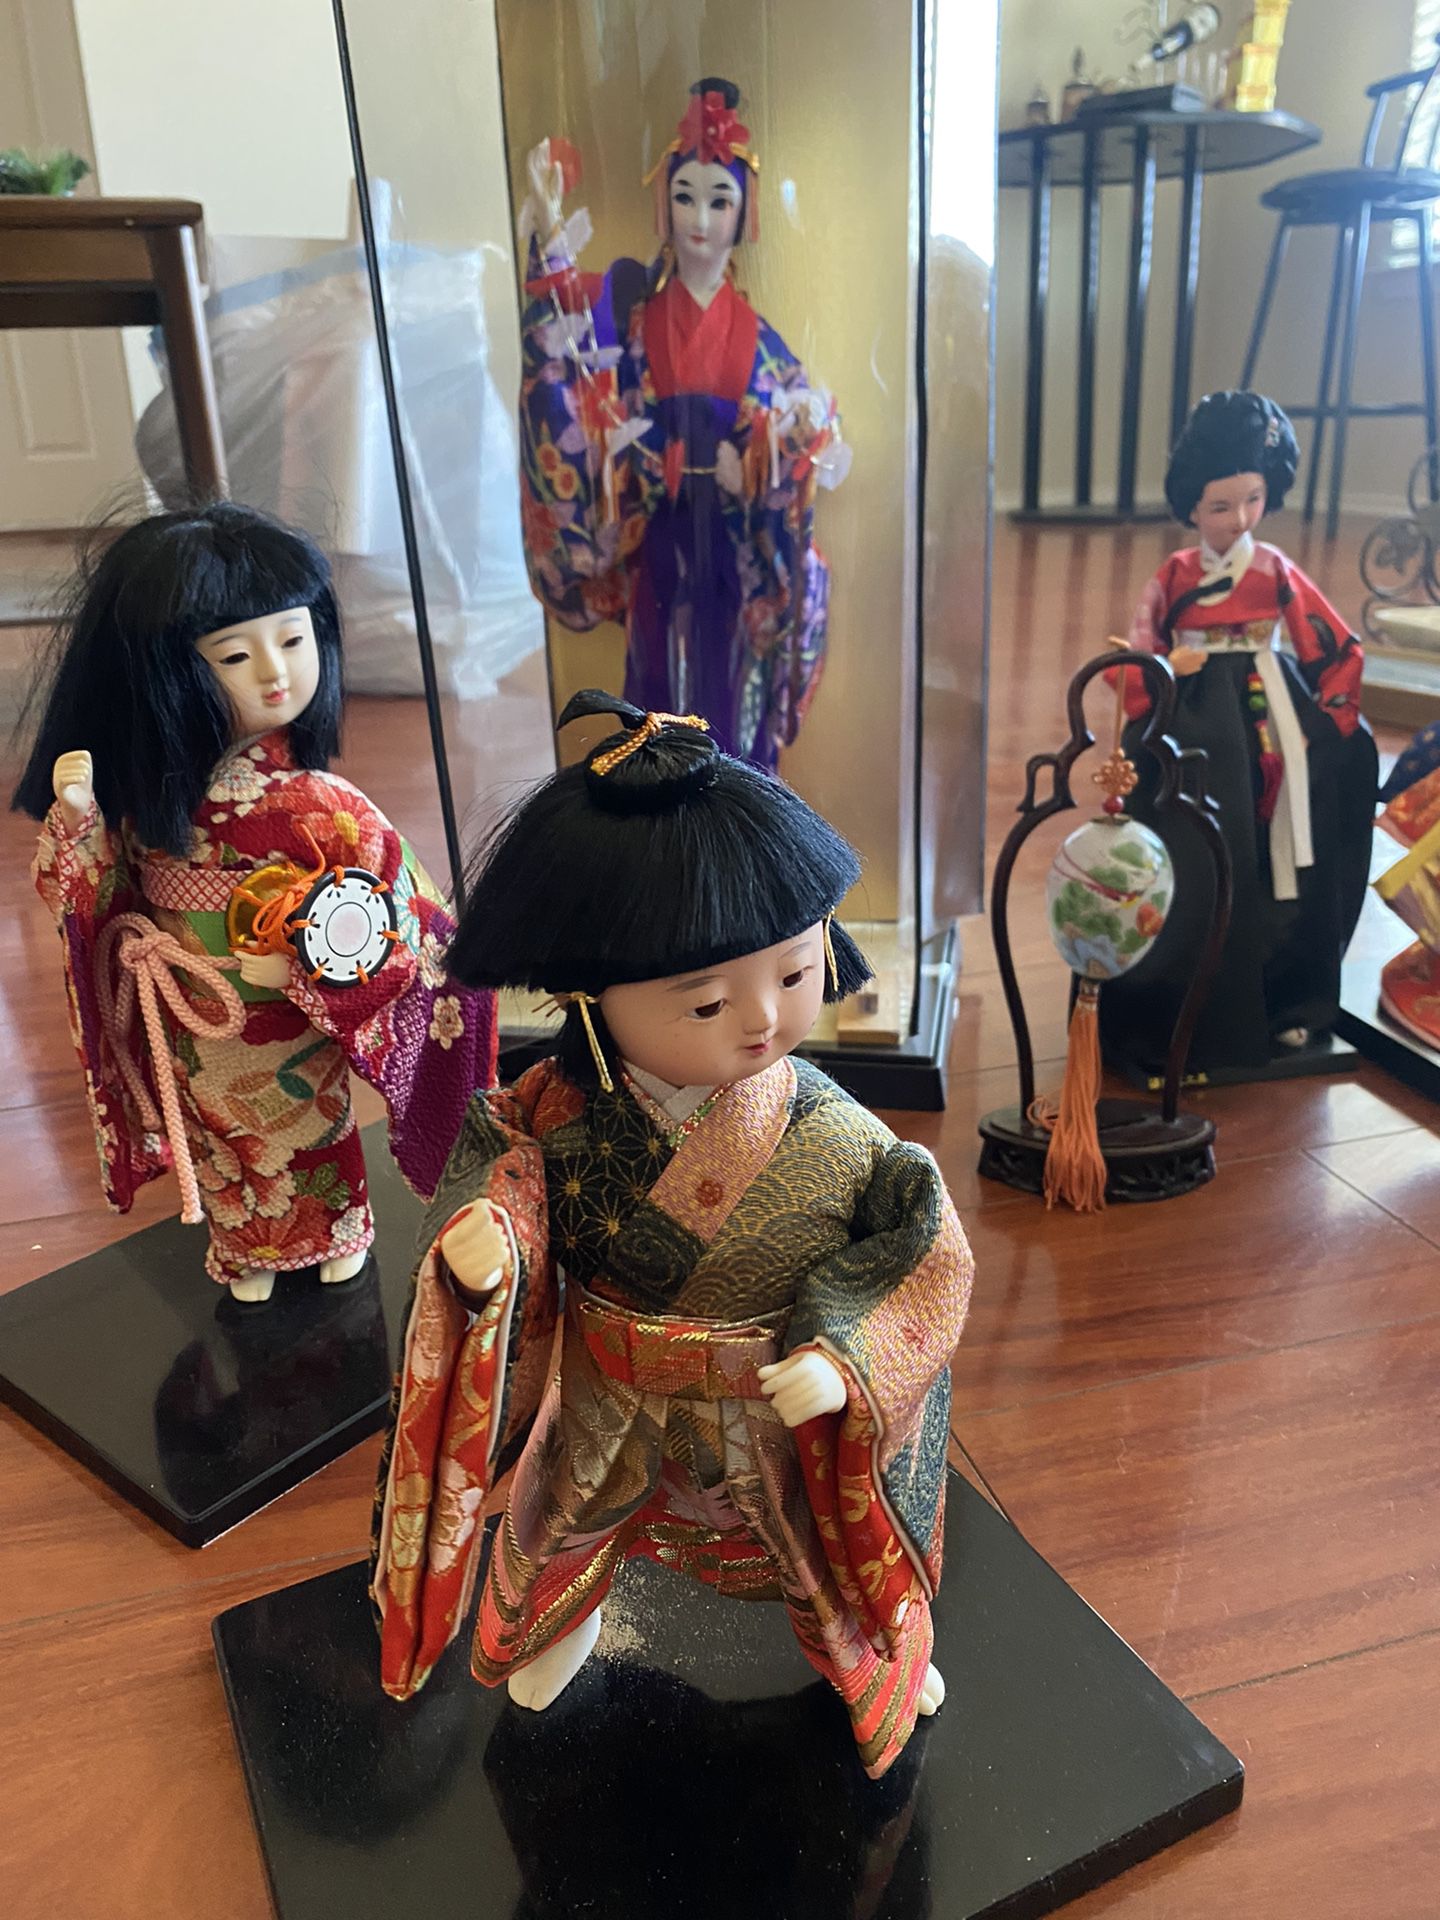 Collectible Japanese’s Dolls